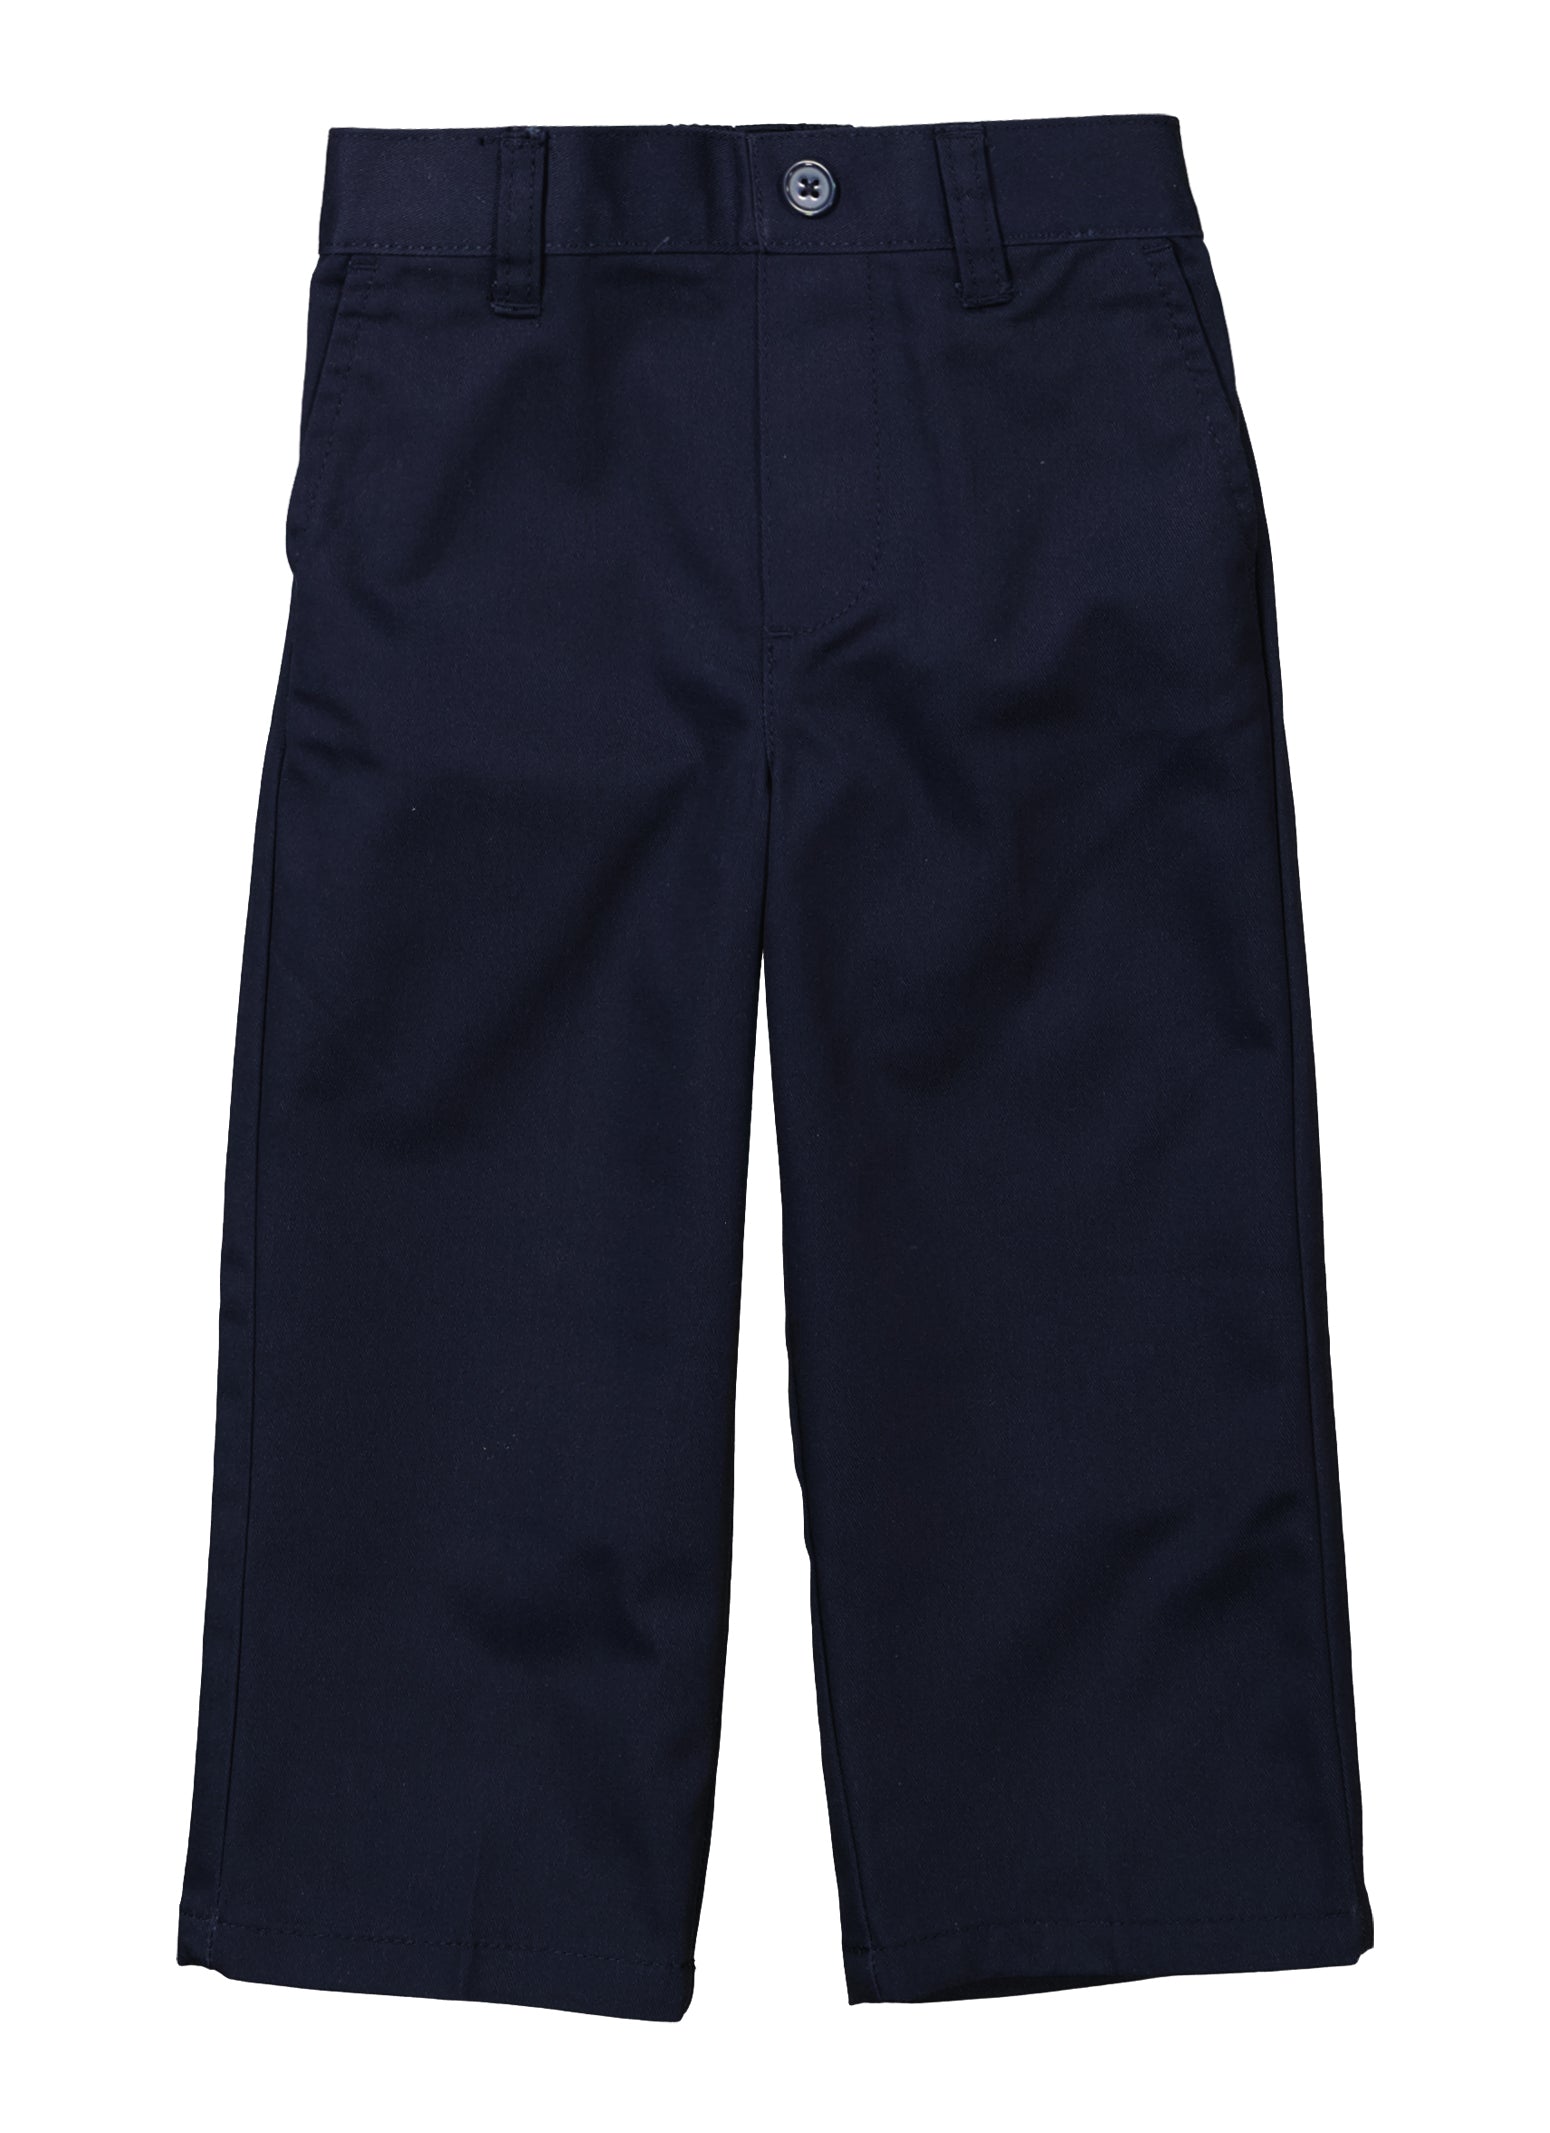 French Toast Boys 2T-4T Relaxed Fit Chinos, Blue, Size 3T